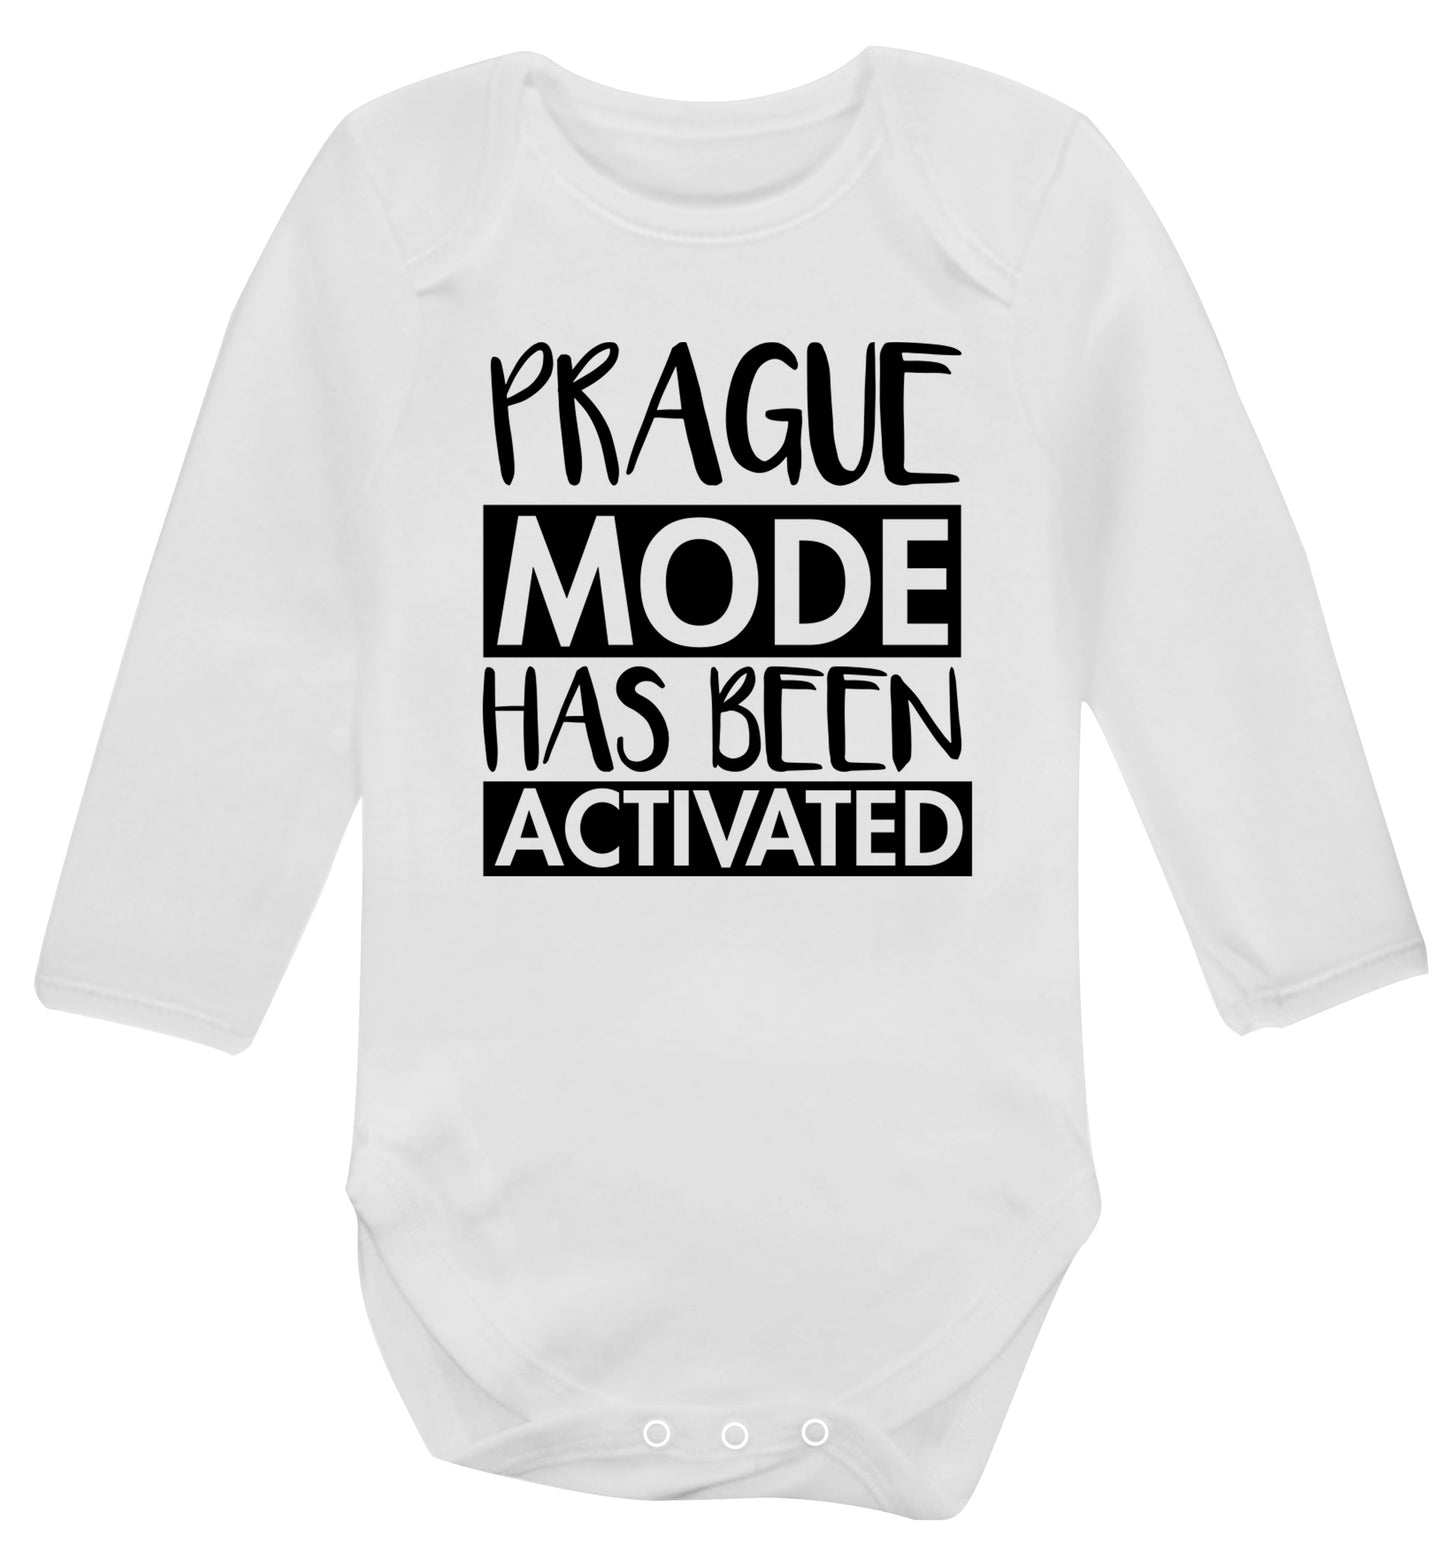 Prague mode has been activated Baby Vest long sleeved white 6-12 months